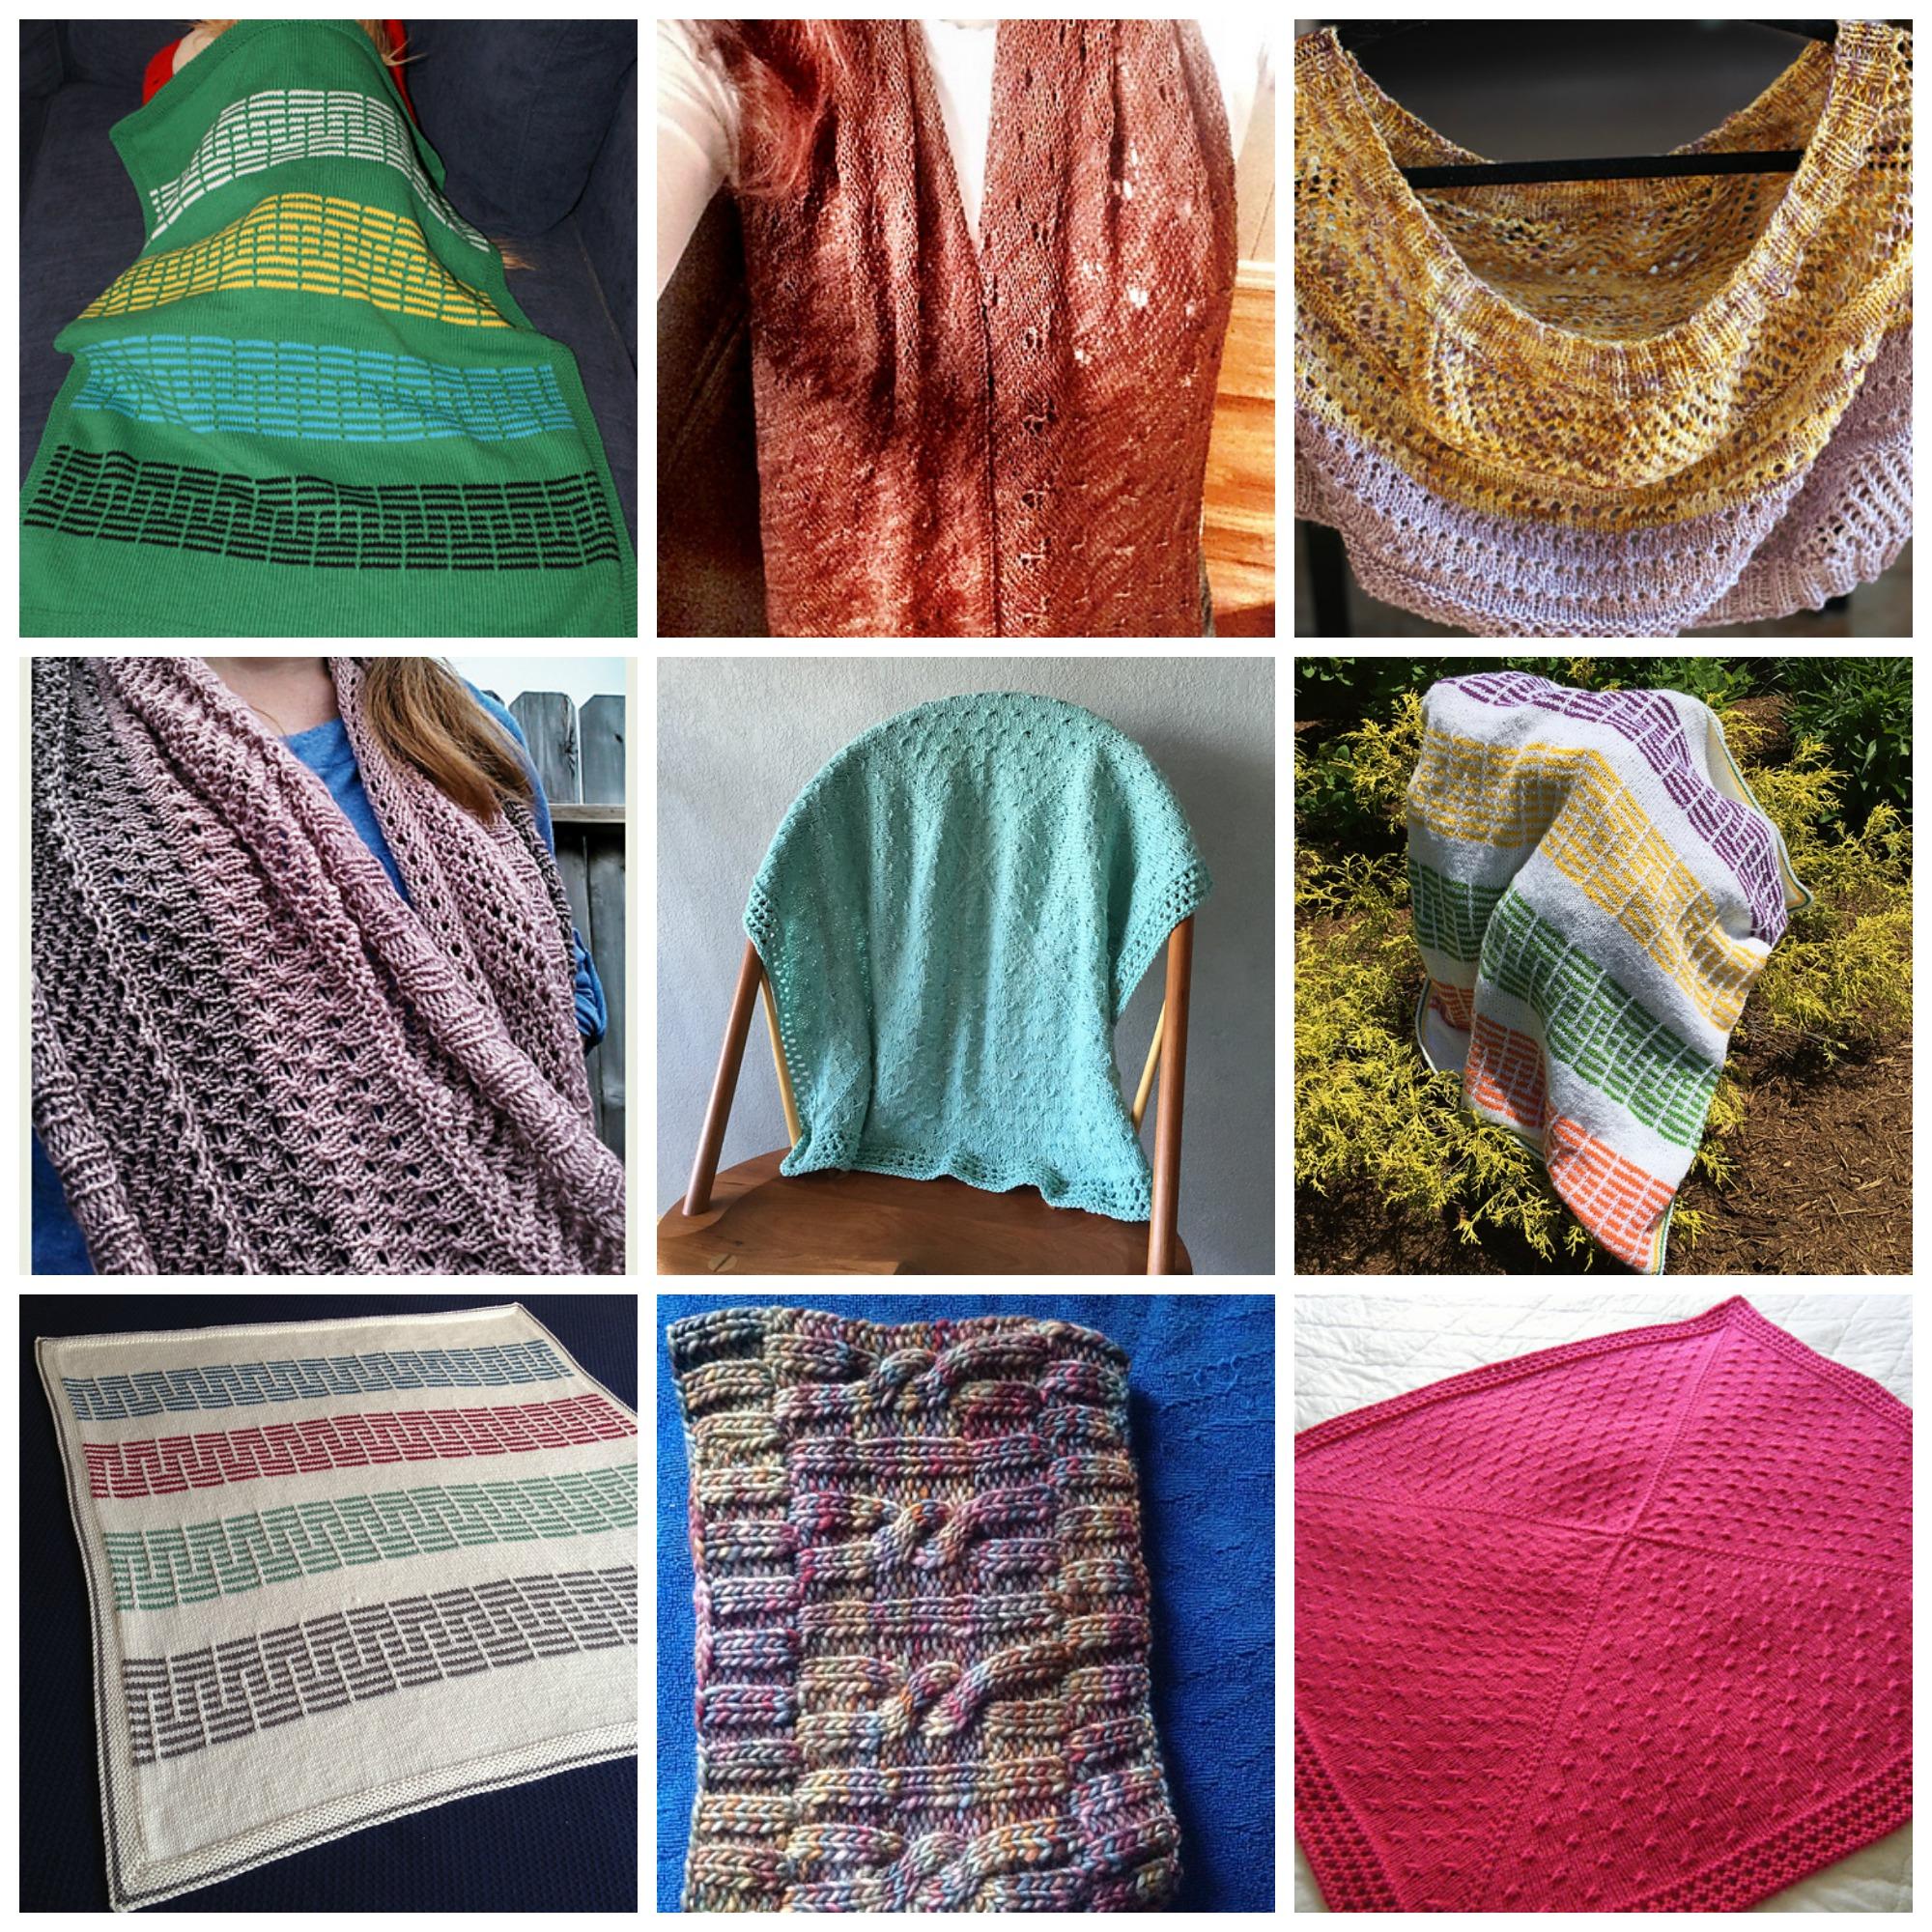 Curious Handmade Cowls and Blankets 